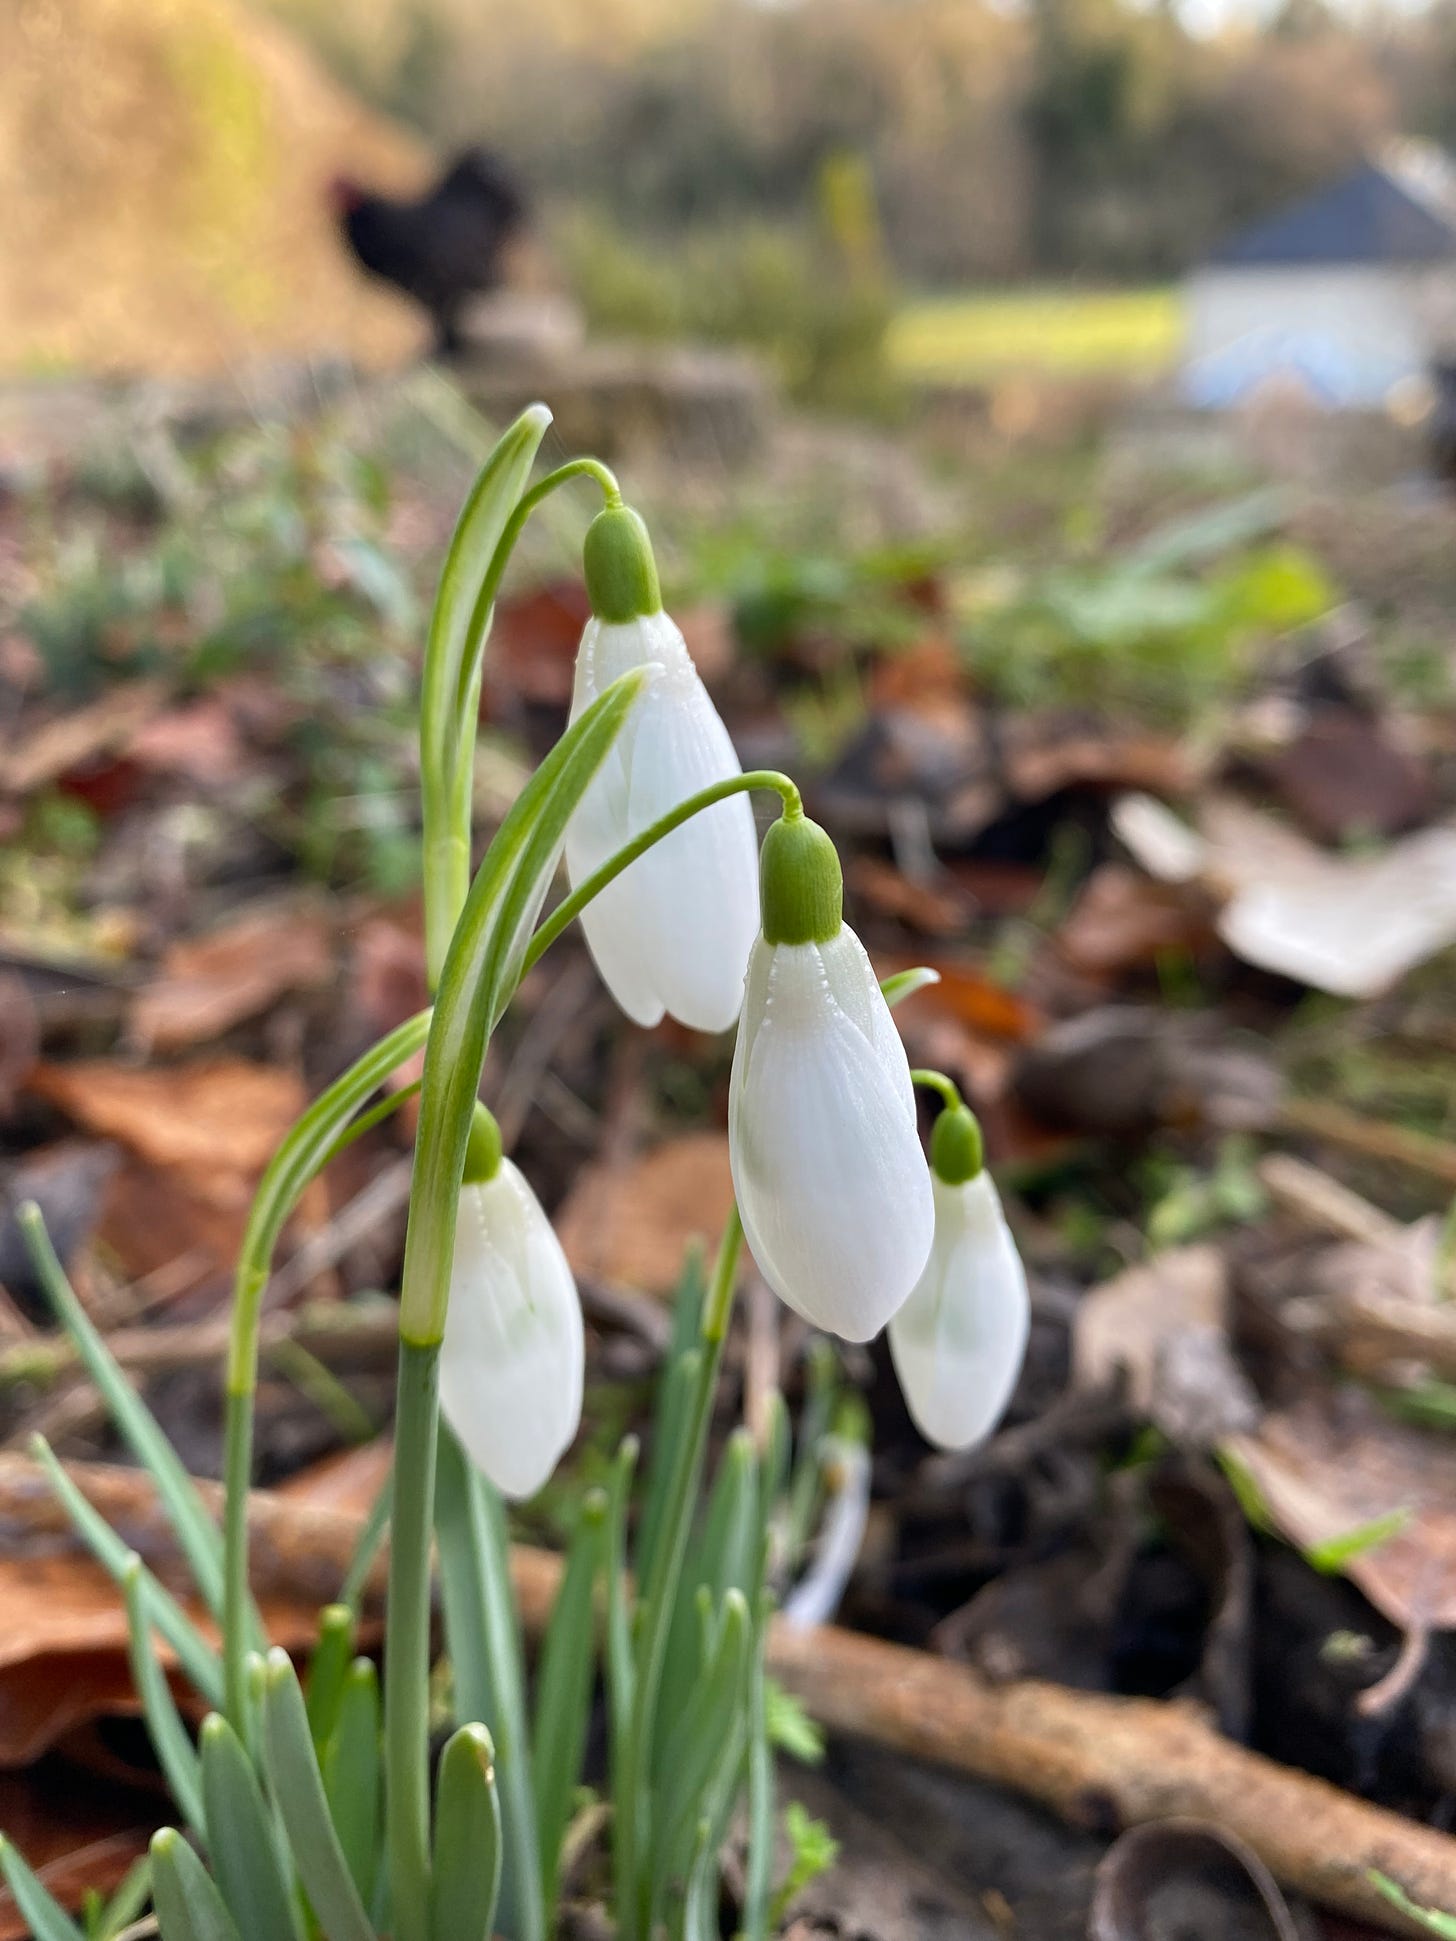 A small clump of just opening snowdrops in close focus, with the blurry outline of a chicken in the distance.